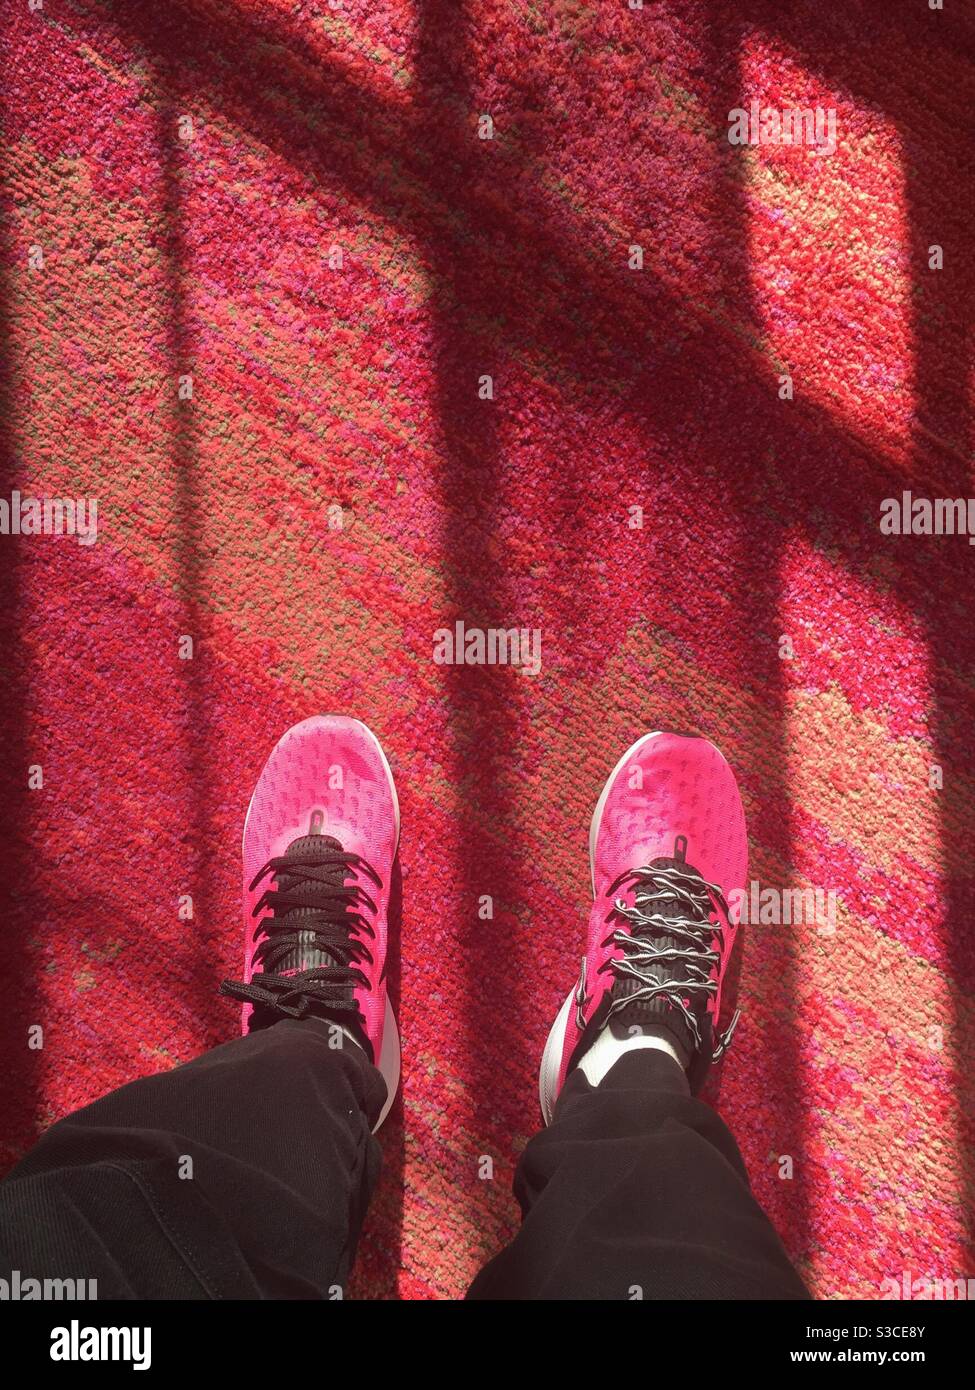 hot pink athletic shoes